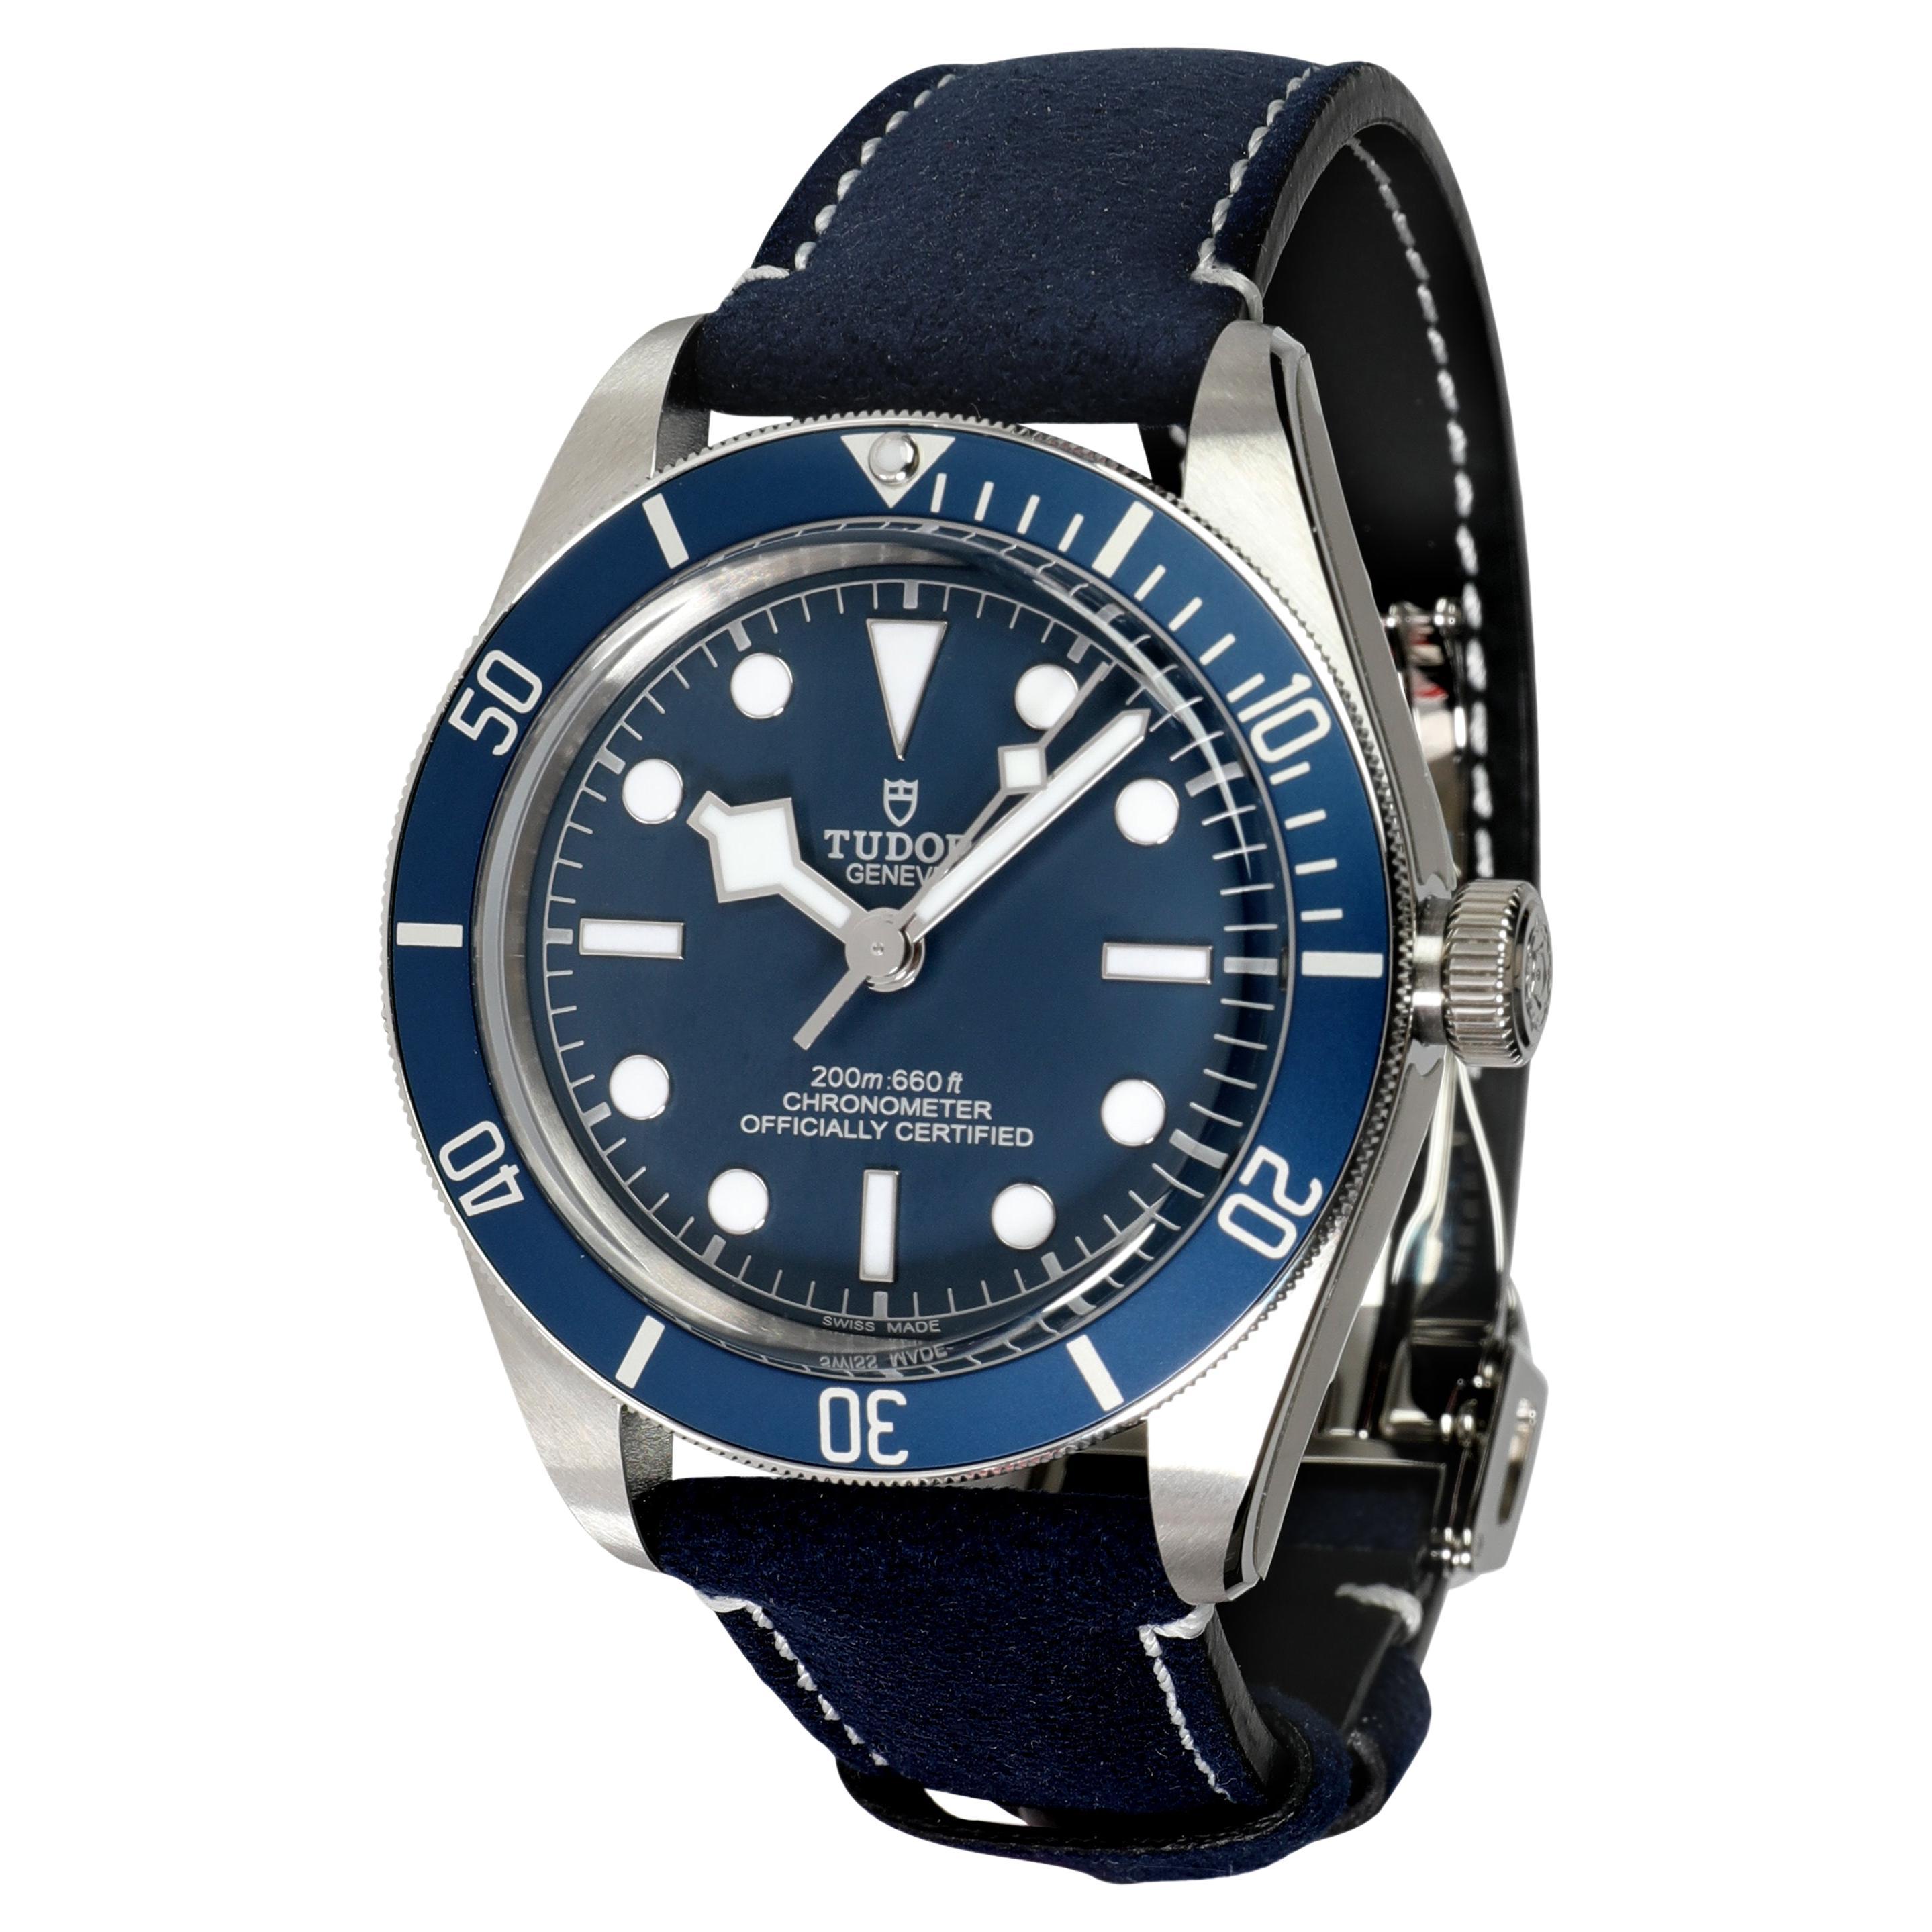 Tudor Black Bay Fifty-Eight 79030B Men's Watch in Stainless Steel